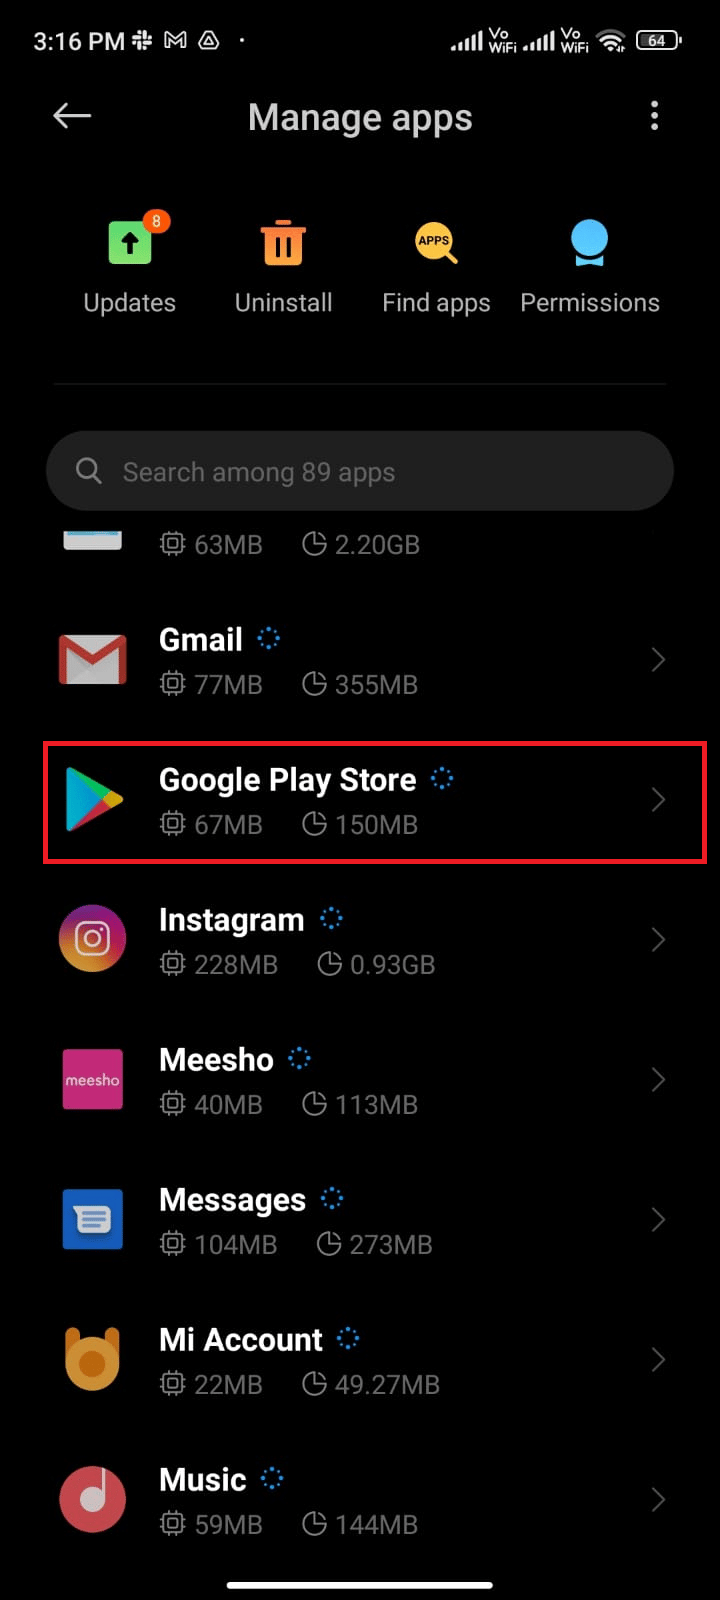 tap on Manage apps and Google Play Store